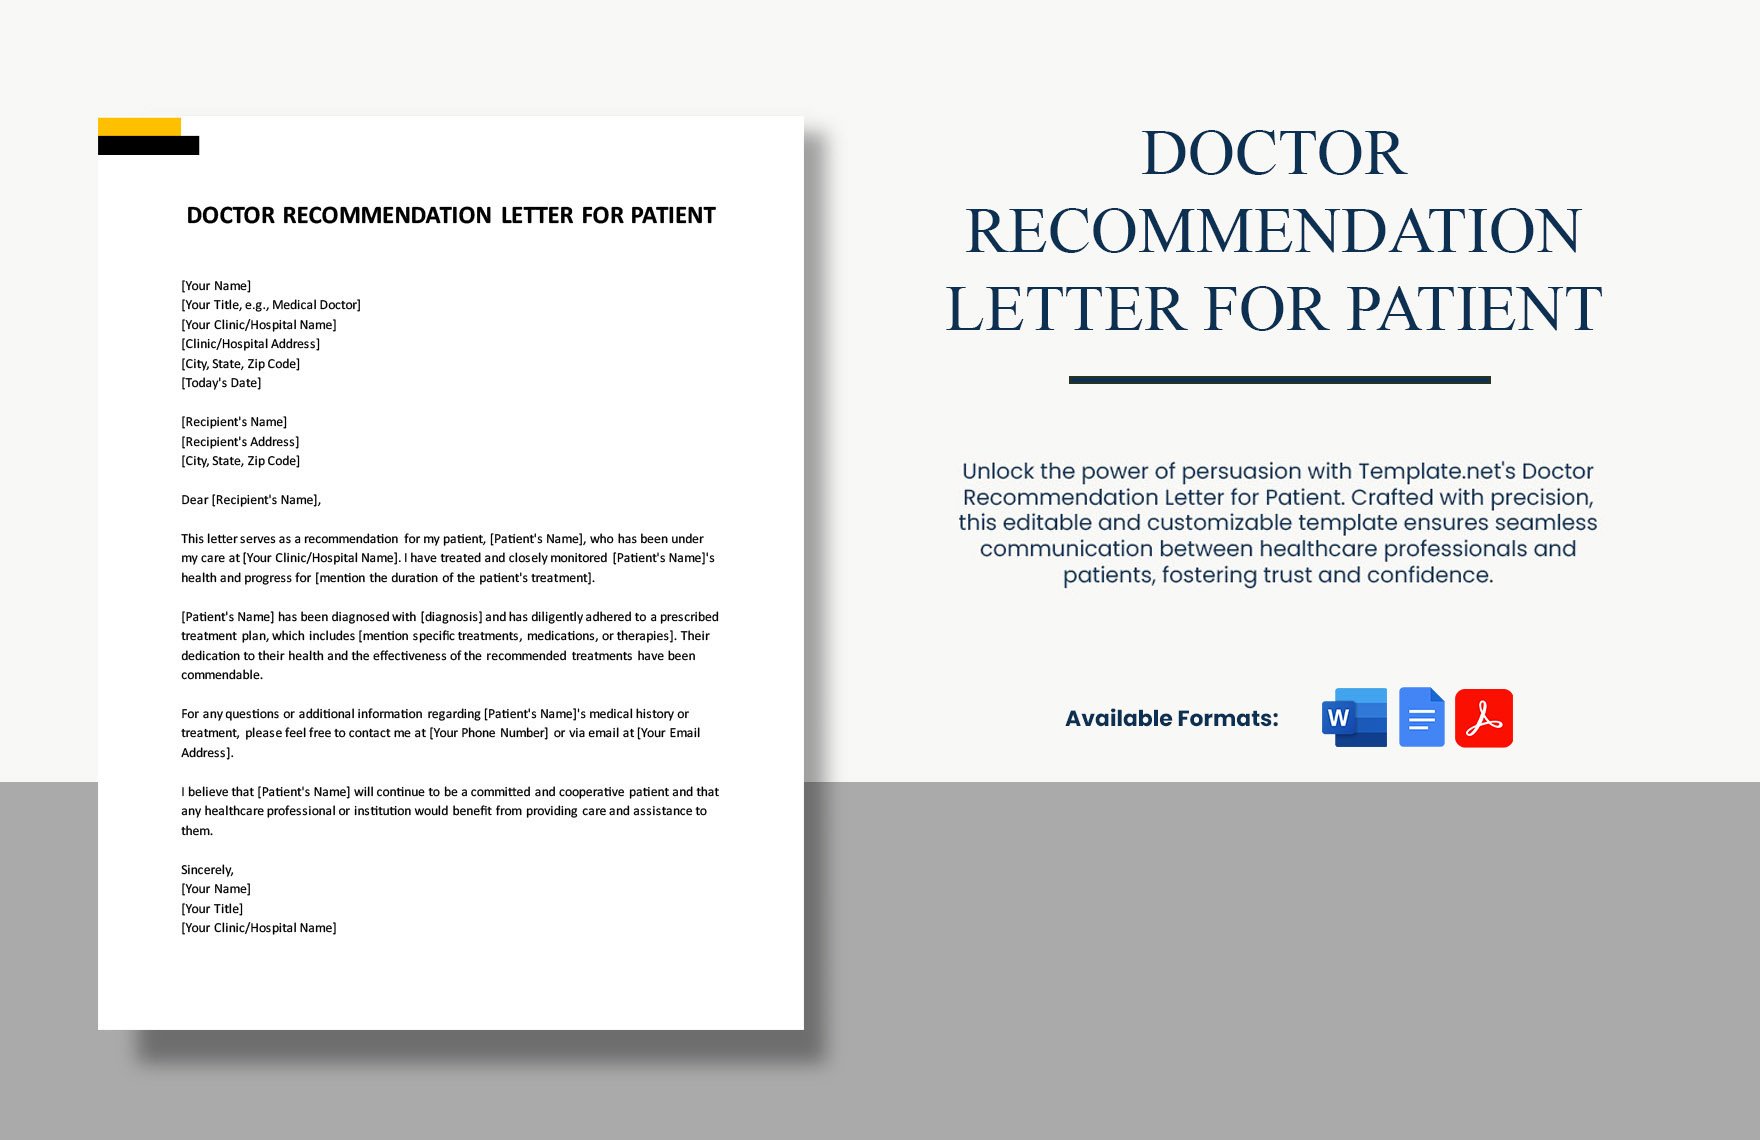 Doctor Recommendation Letter For Patient in Word, Google Docs, PDF